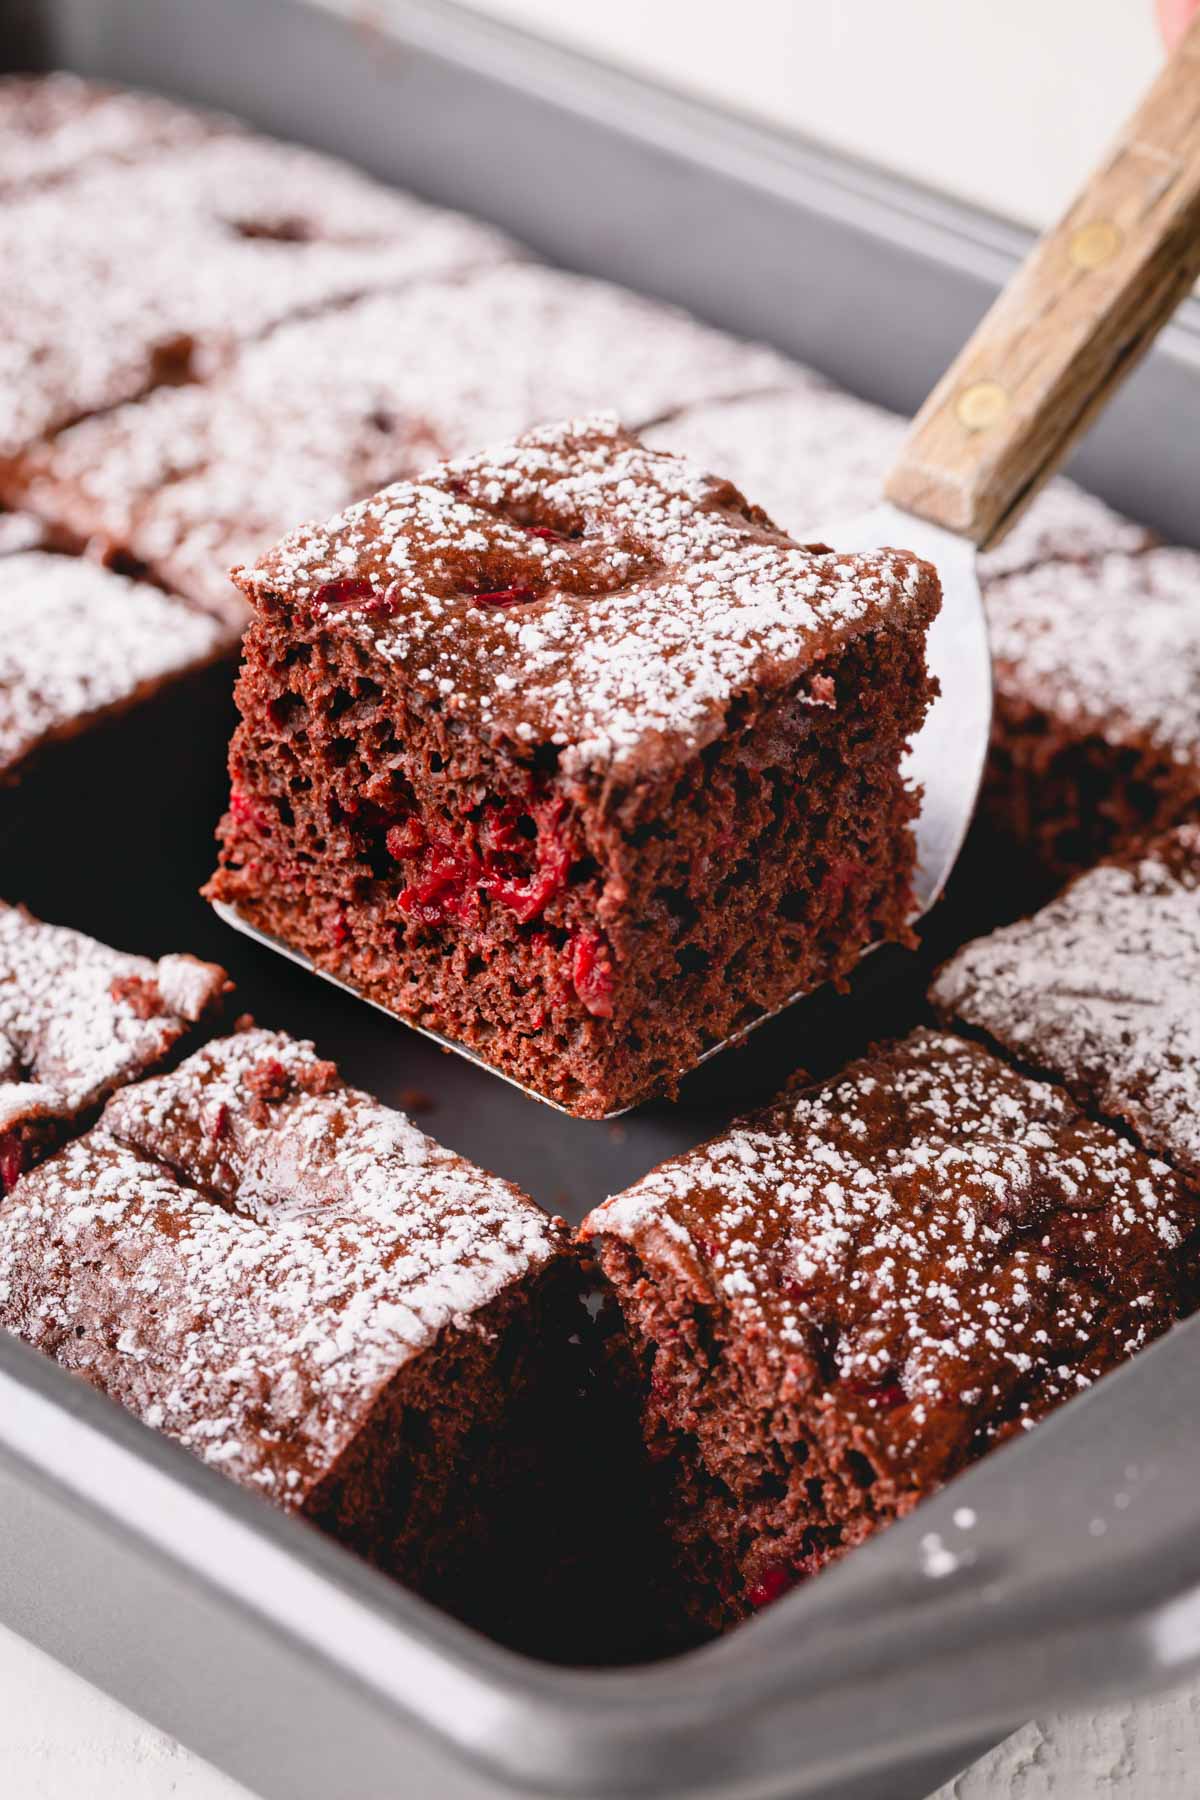 Chocolate cherry cake in a baking pan with one slice lifted.